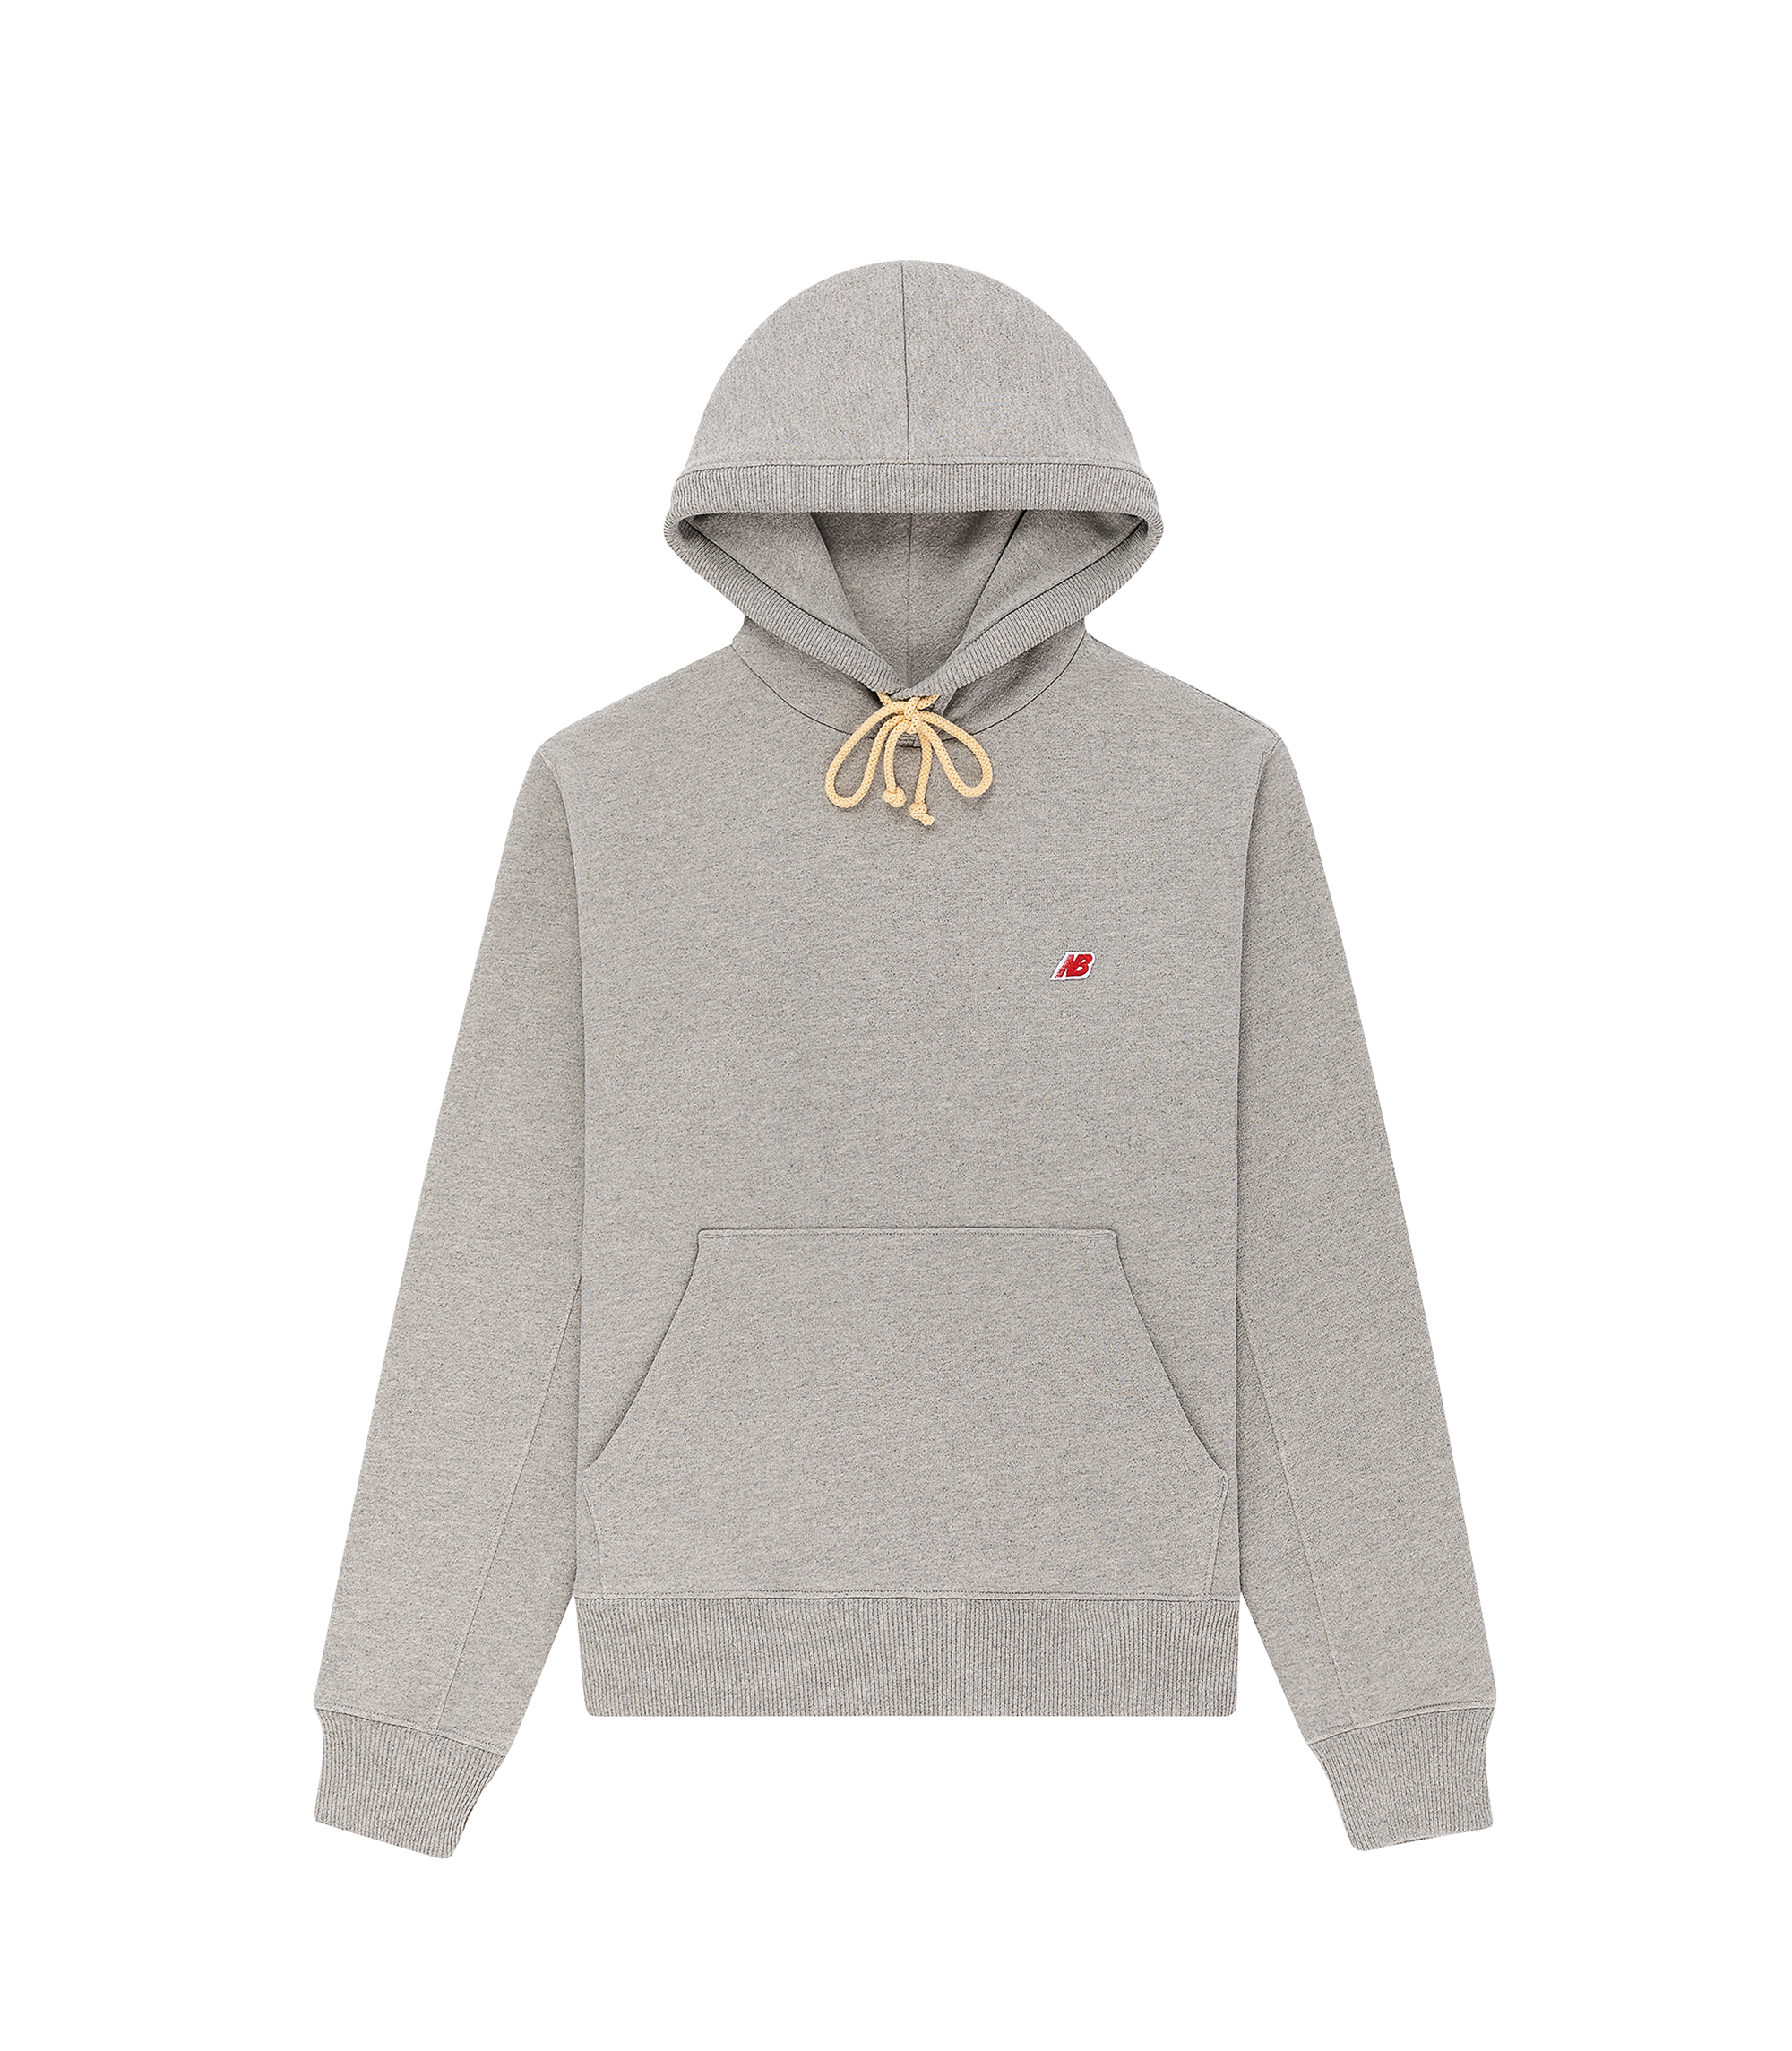 Made in USA Hooded Sweatshirt - Athletic Gray